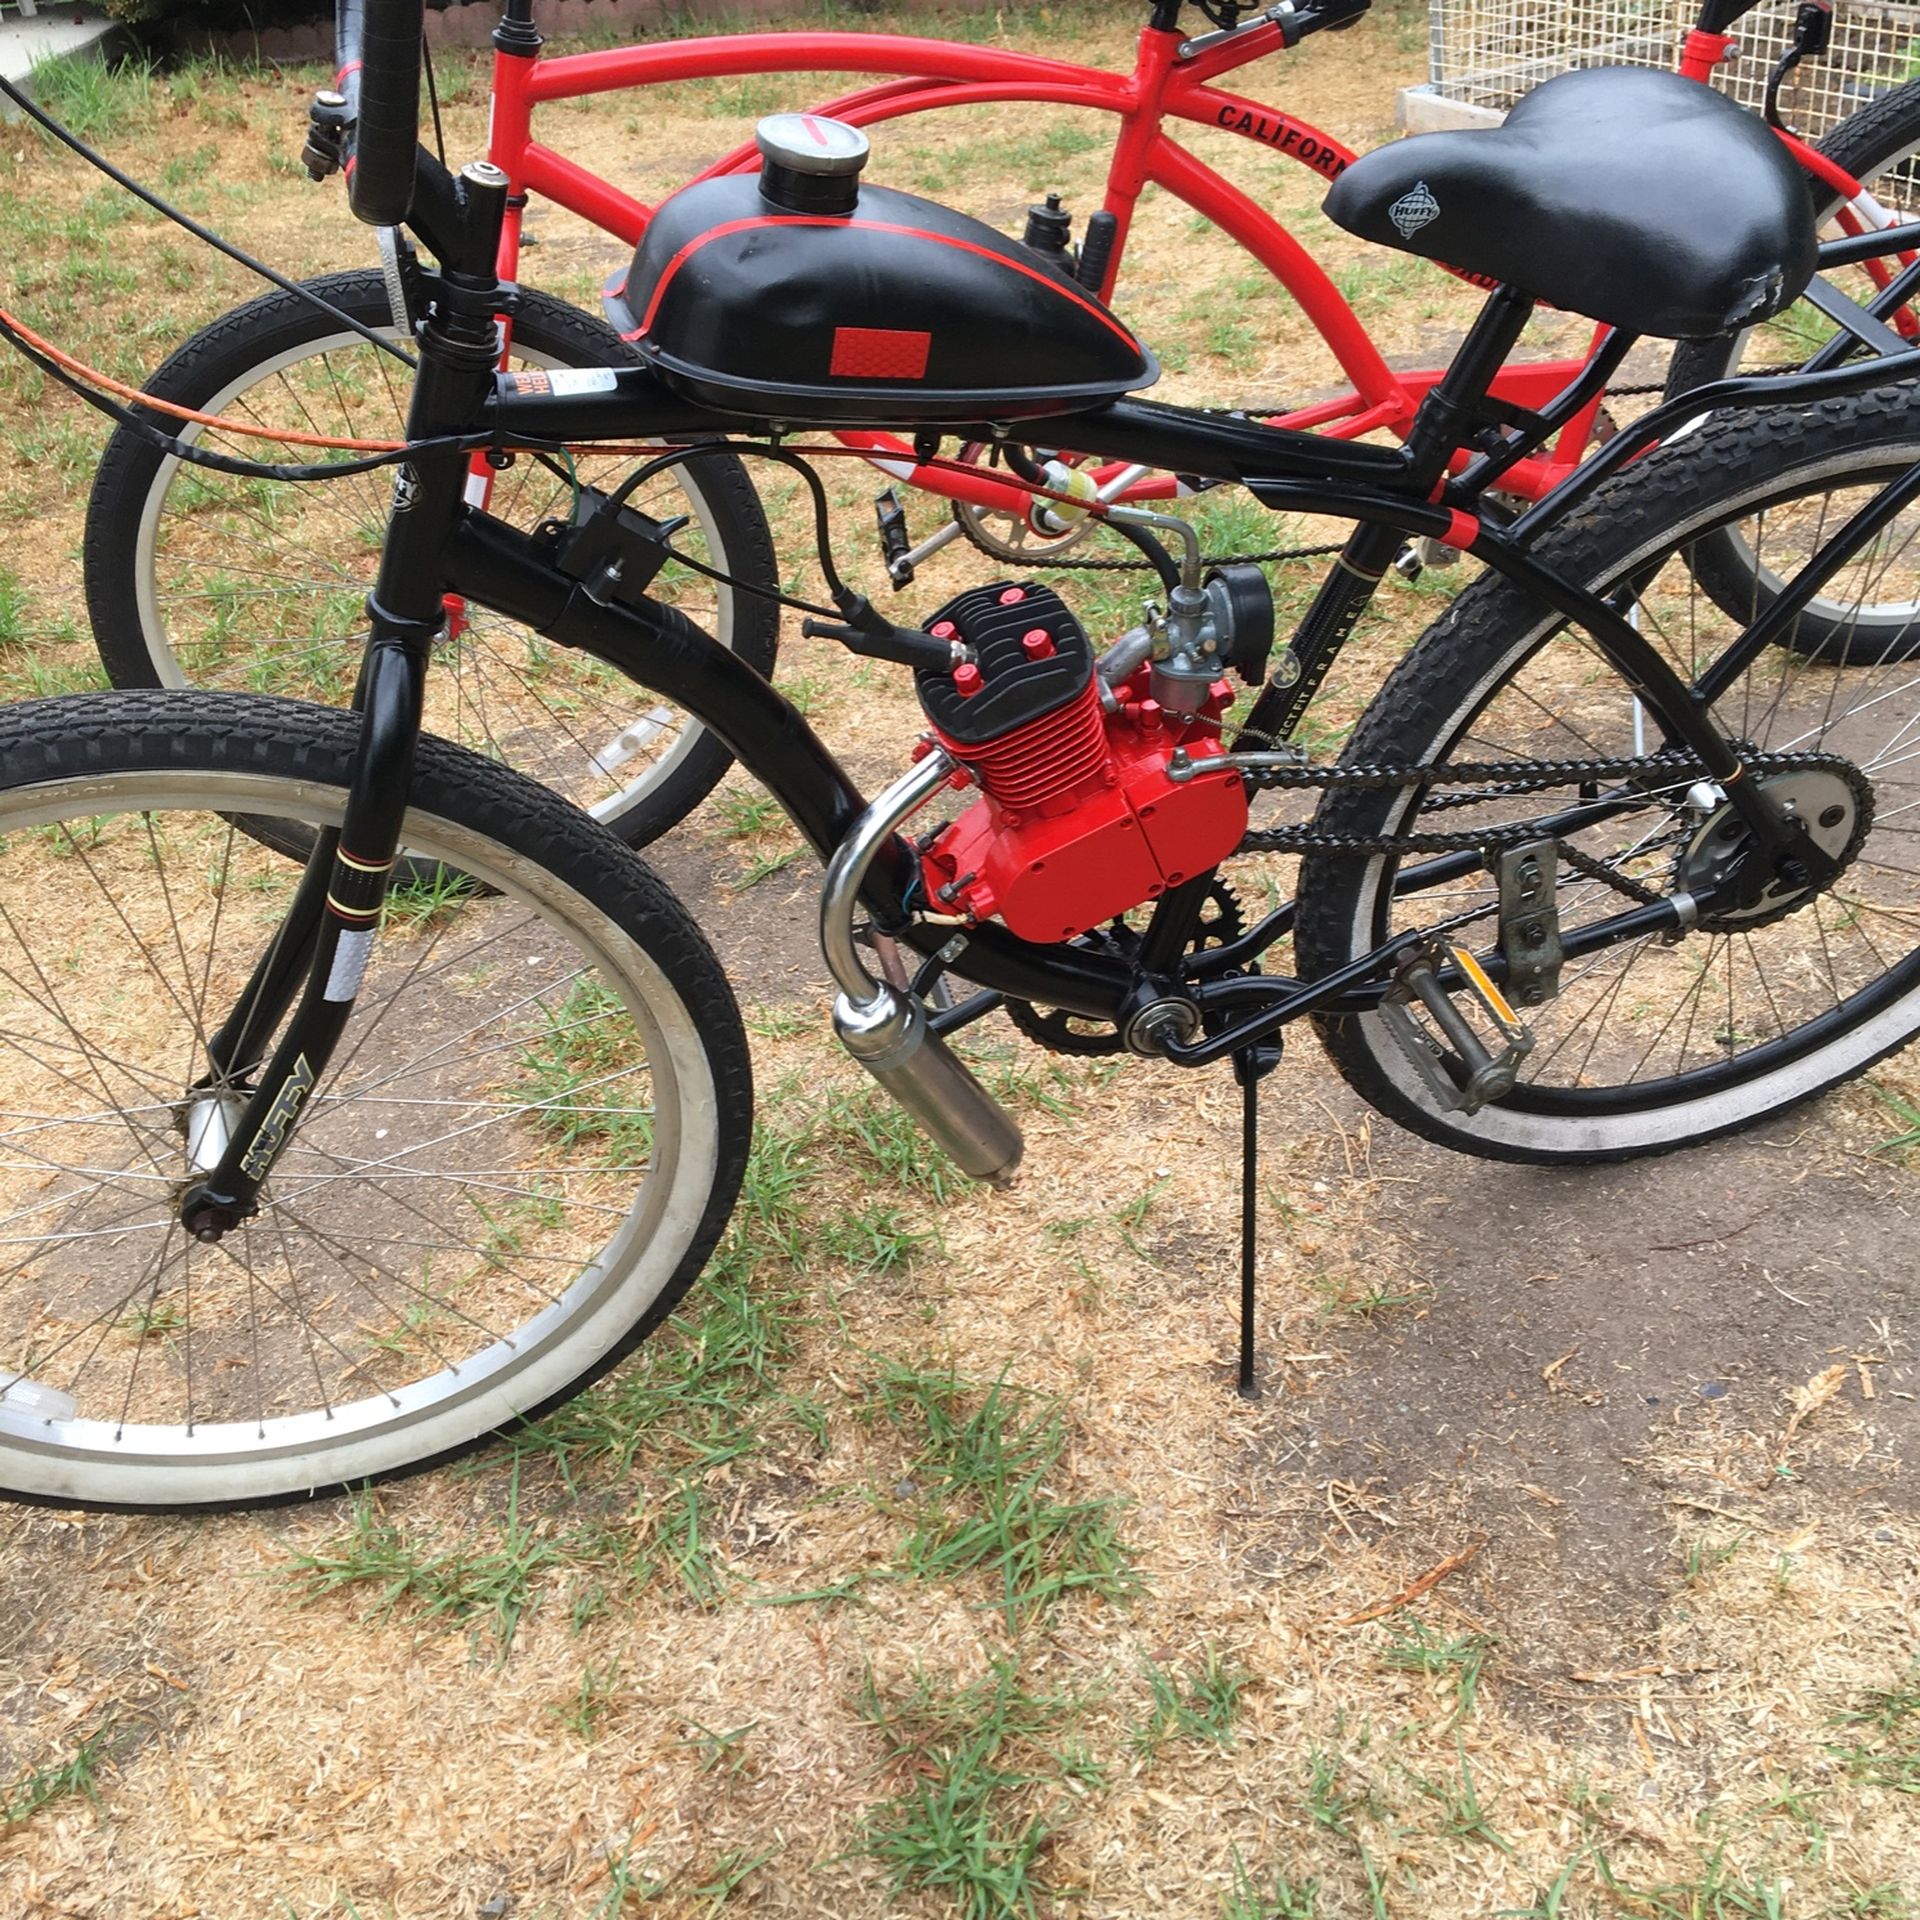 2  Beach Cruiser Bikes For Sale ,one With 2 Seats And 2nd one is Motorized Bike .